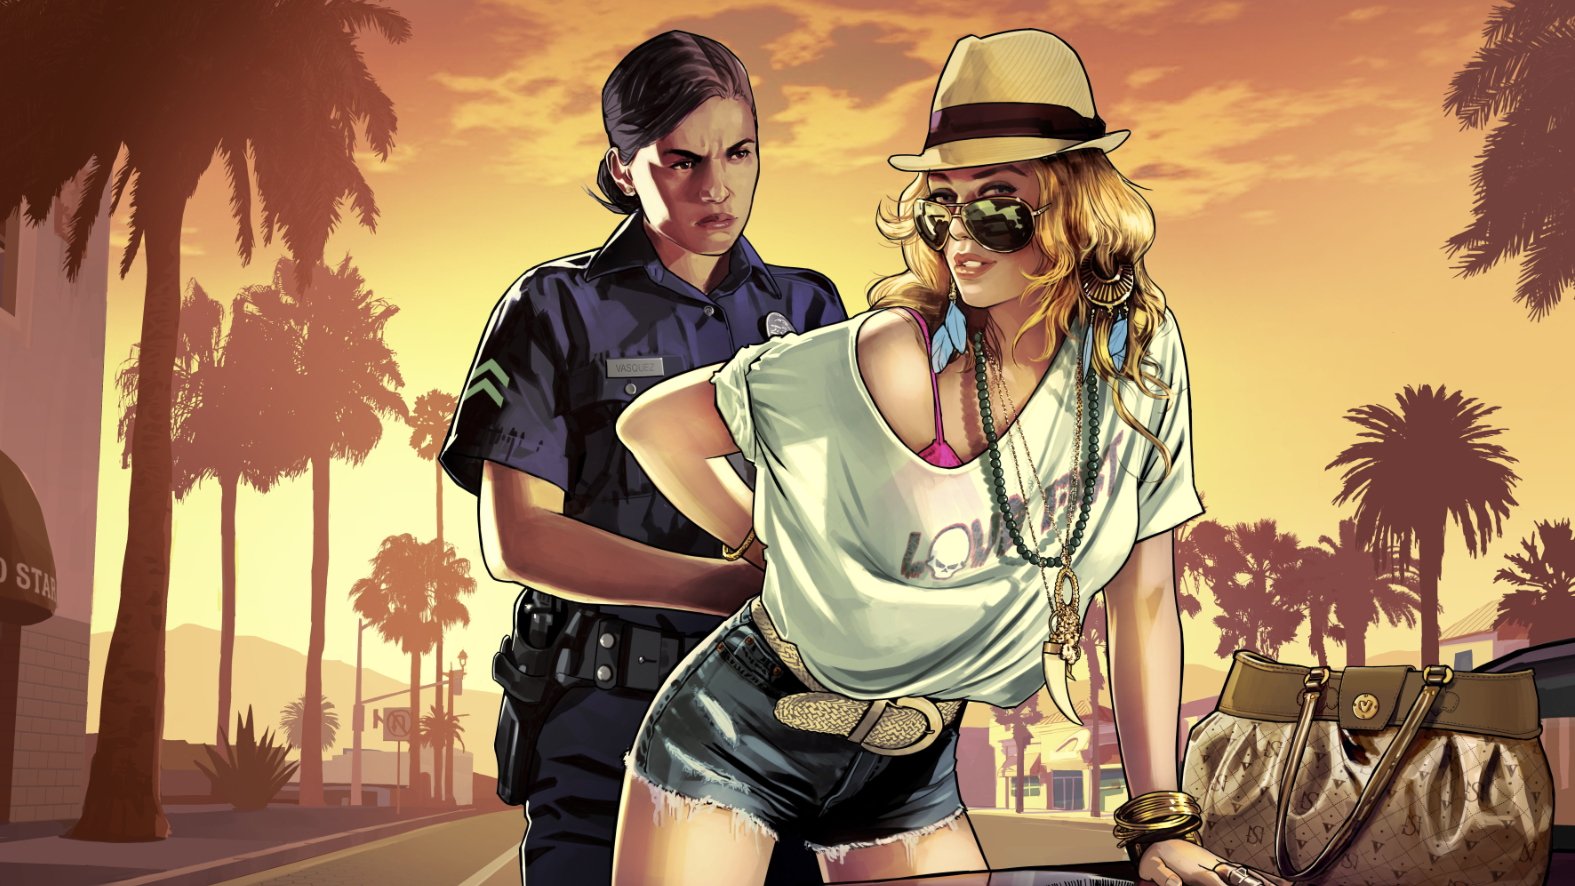 IGN on X: GTA 5 Remastered, which is now out on next-gen consoles, has  seemingly removed many negative depictions of trans people from the game,  including NPCs, an arcade item, and transphobic